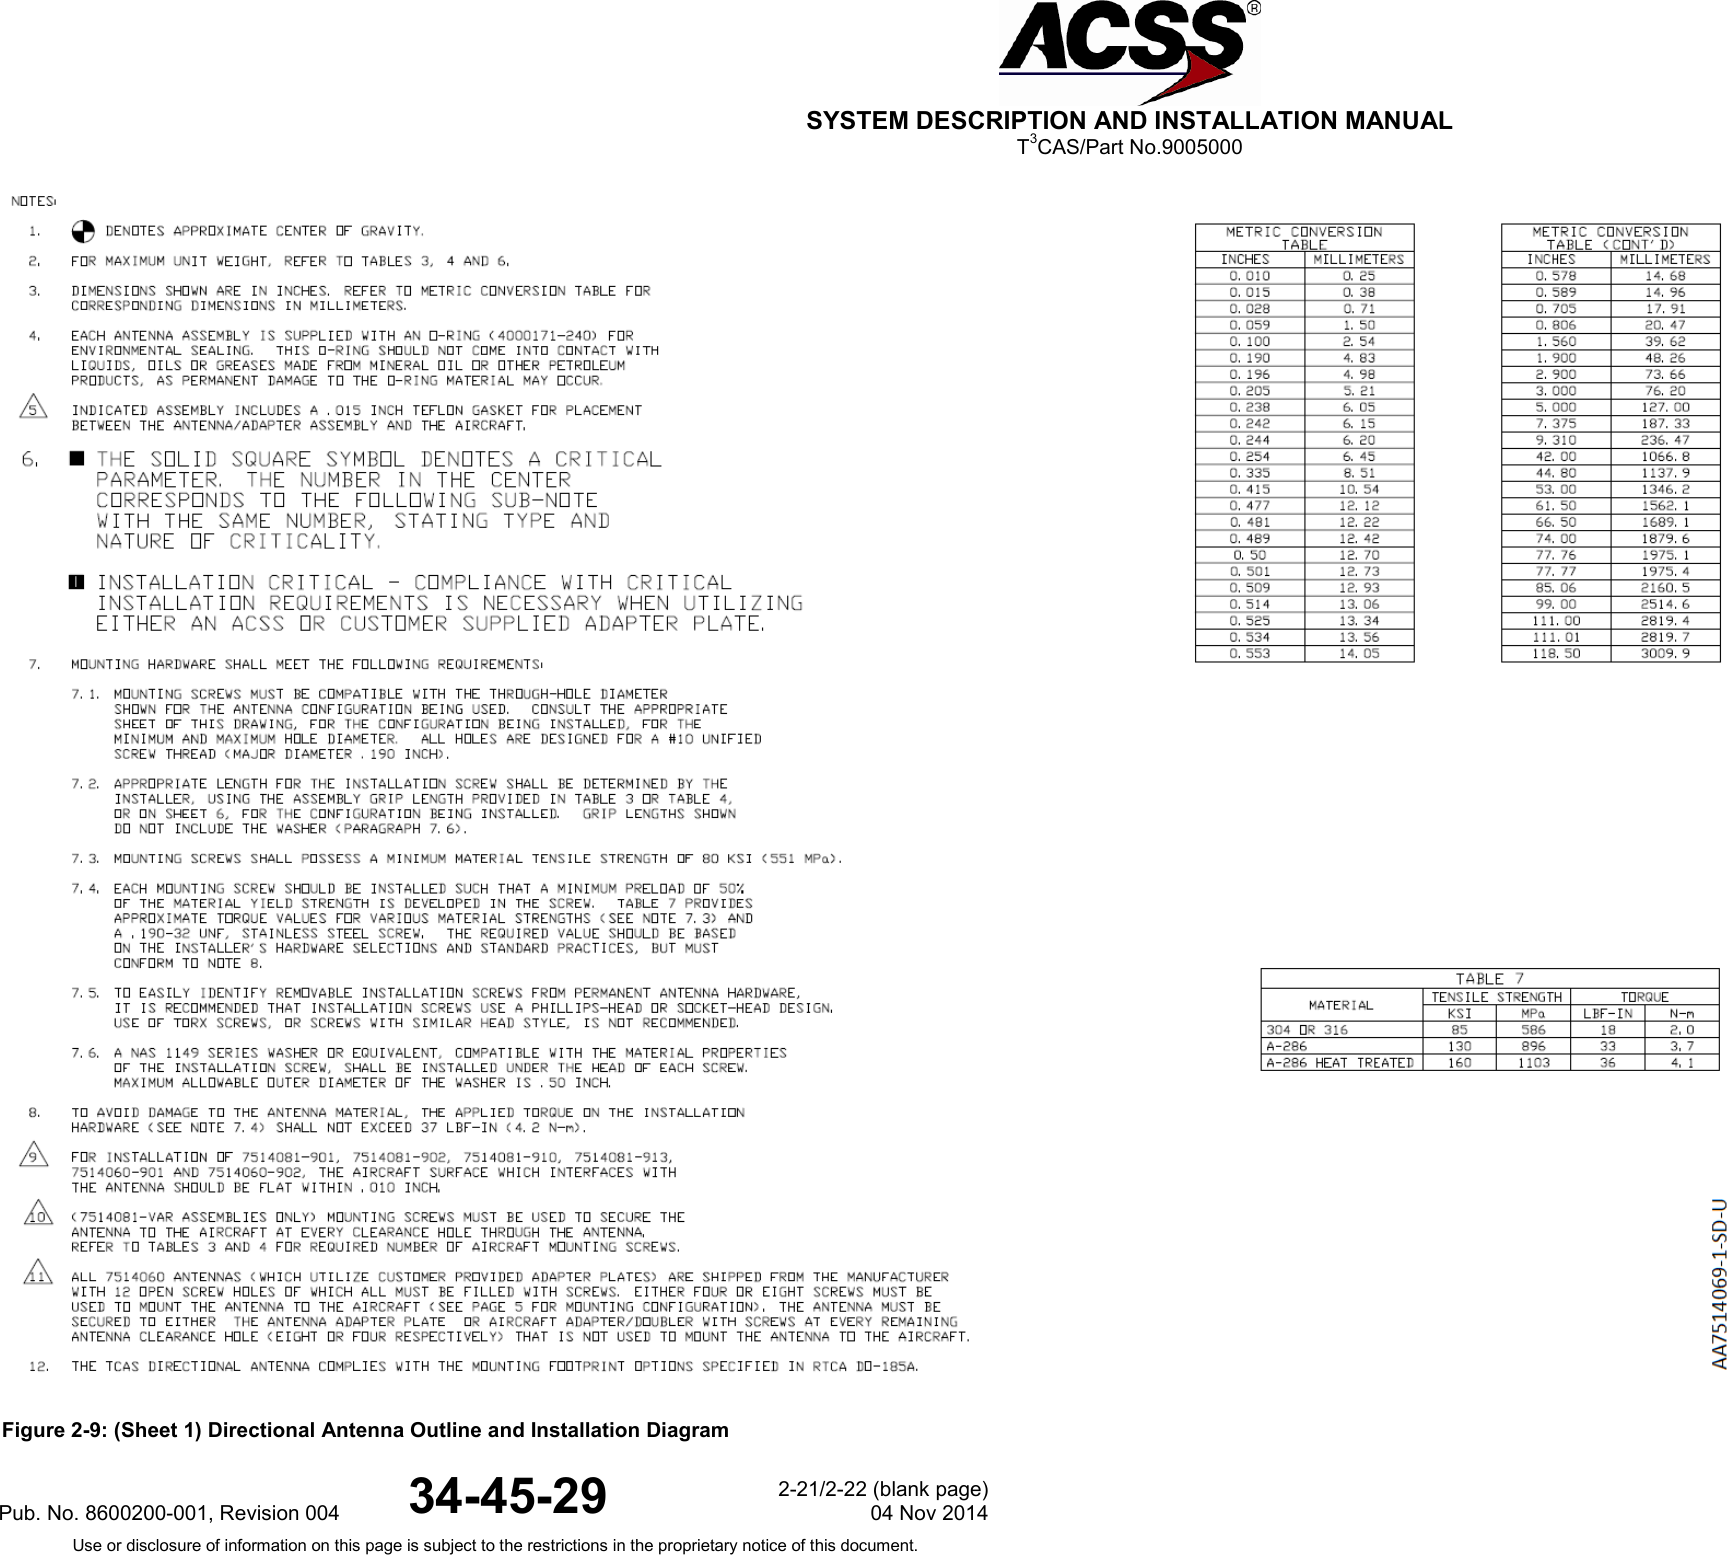  SYSTEM DESCRIPTION AND INSTALLATION MANUAL T3CAS/Part No.9005000  Figure 2-9: (Sheet 1) Directional Antenna Outline and Installation DiagramPub. No. 8600200-001, Revision 004 34-45-29 2-21/2-22 (blank page) 04 Nov 2014 Use or disclosure of information on this page is subject to the restrictions in the proprietary notice of this document.  